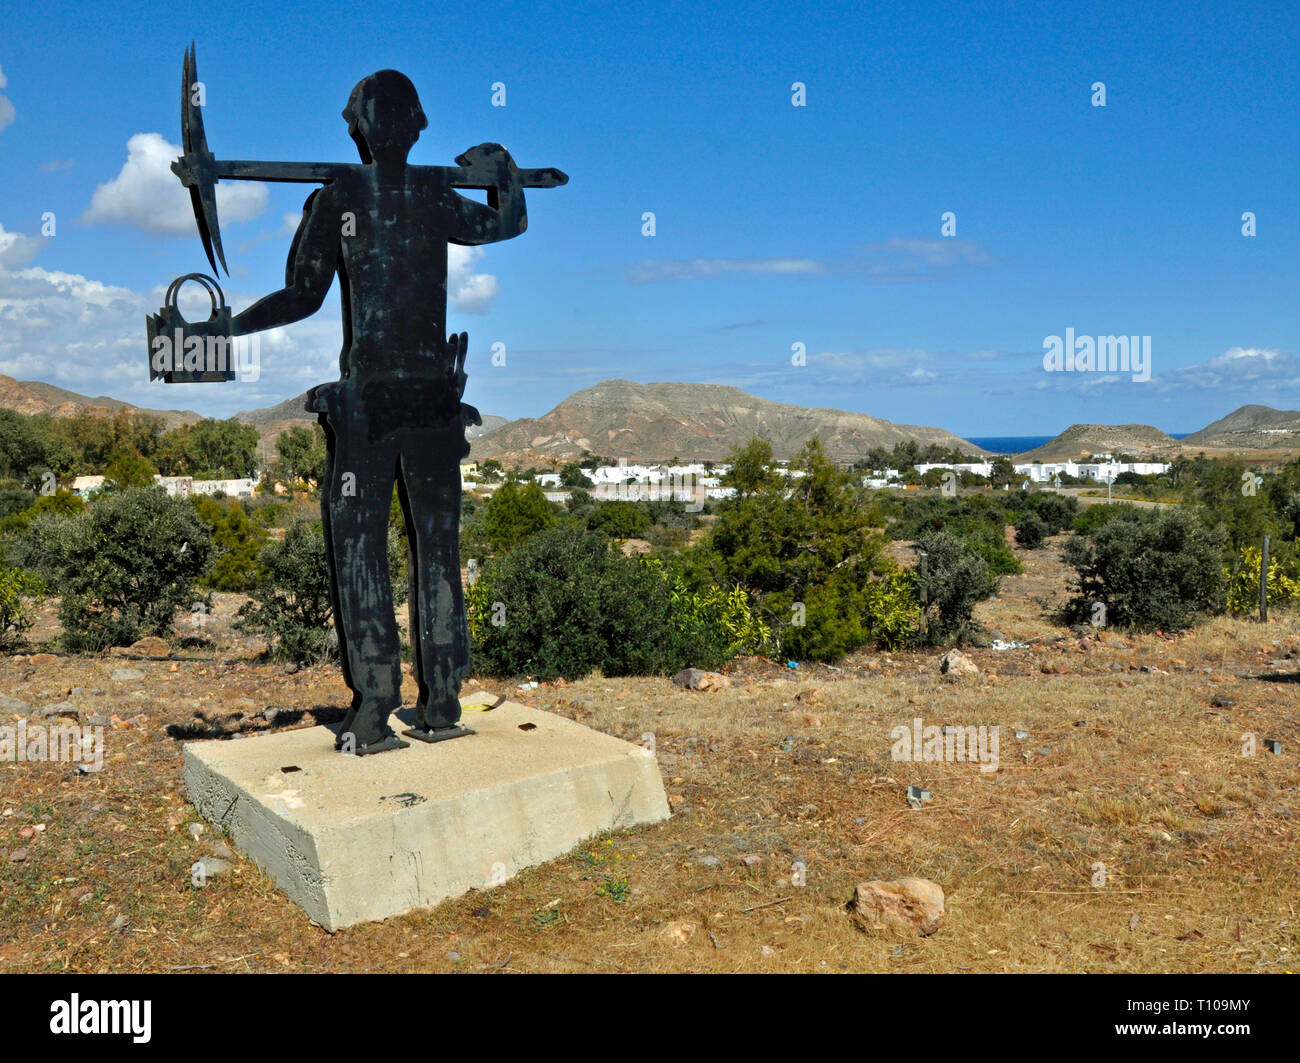 Sculpture of gold miner at the entrance to the village of Rodalquilar, an old gold mining town in Almeria, later used as a Hollywood film location. Stock Photo